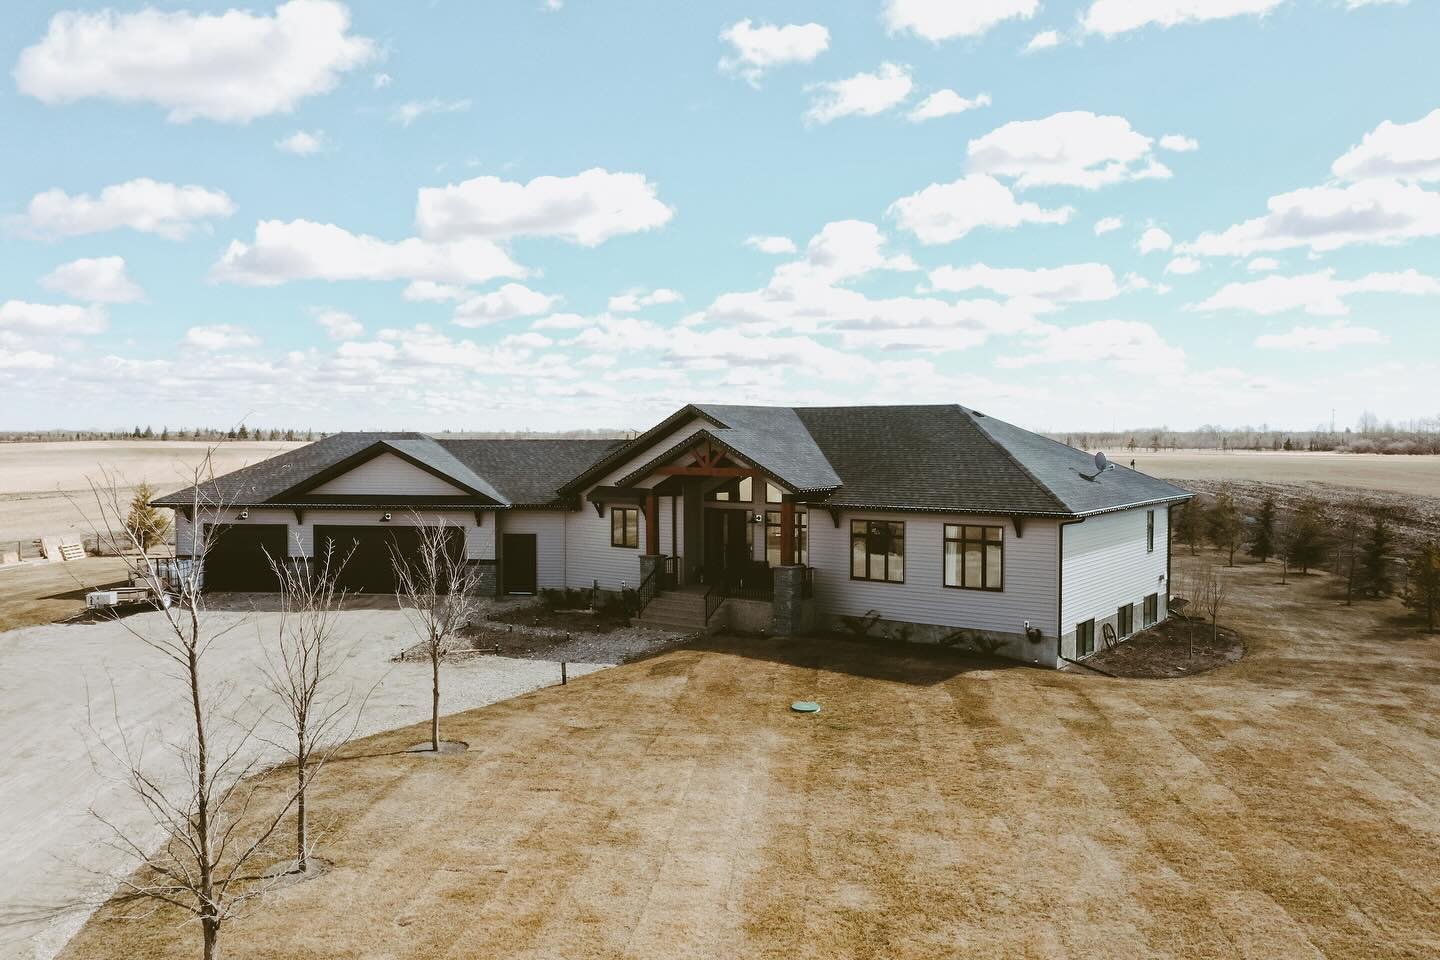 Here&rsquo;s a look at the exterior for a custom acreage build done for our amazing clients! We love the spacious garage and wooden beam details. 

Want to build your own retreat but don&rsquo;t know where to start? We&rsquo;ve got you covered.

Cont